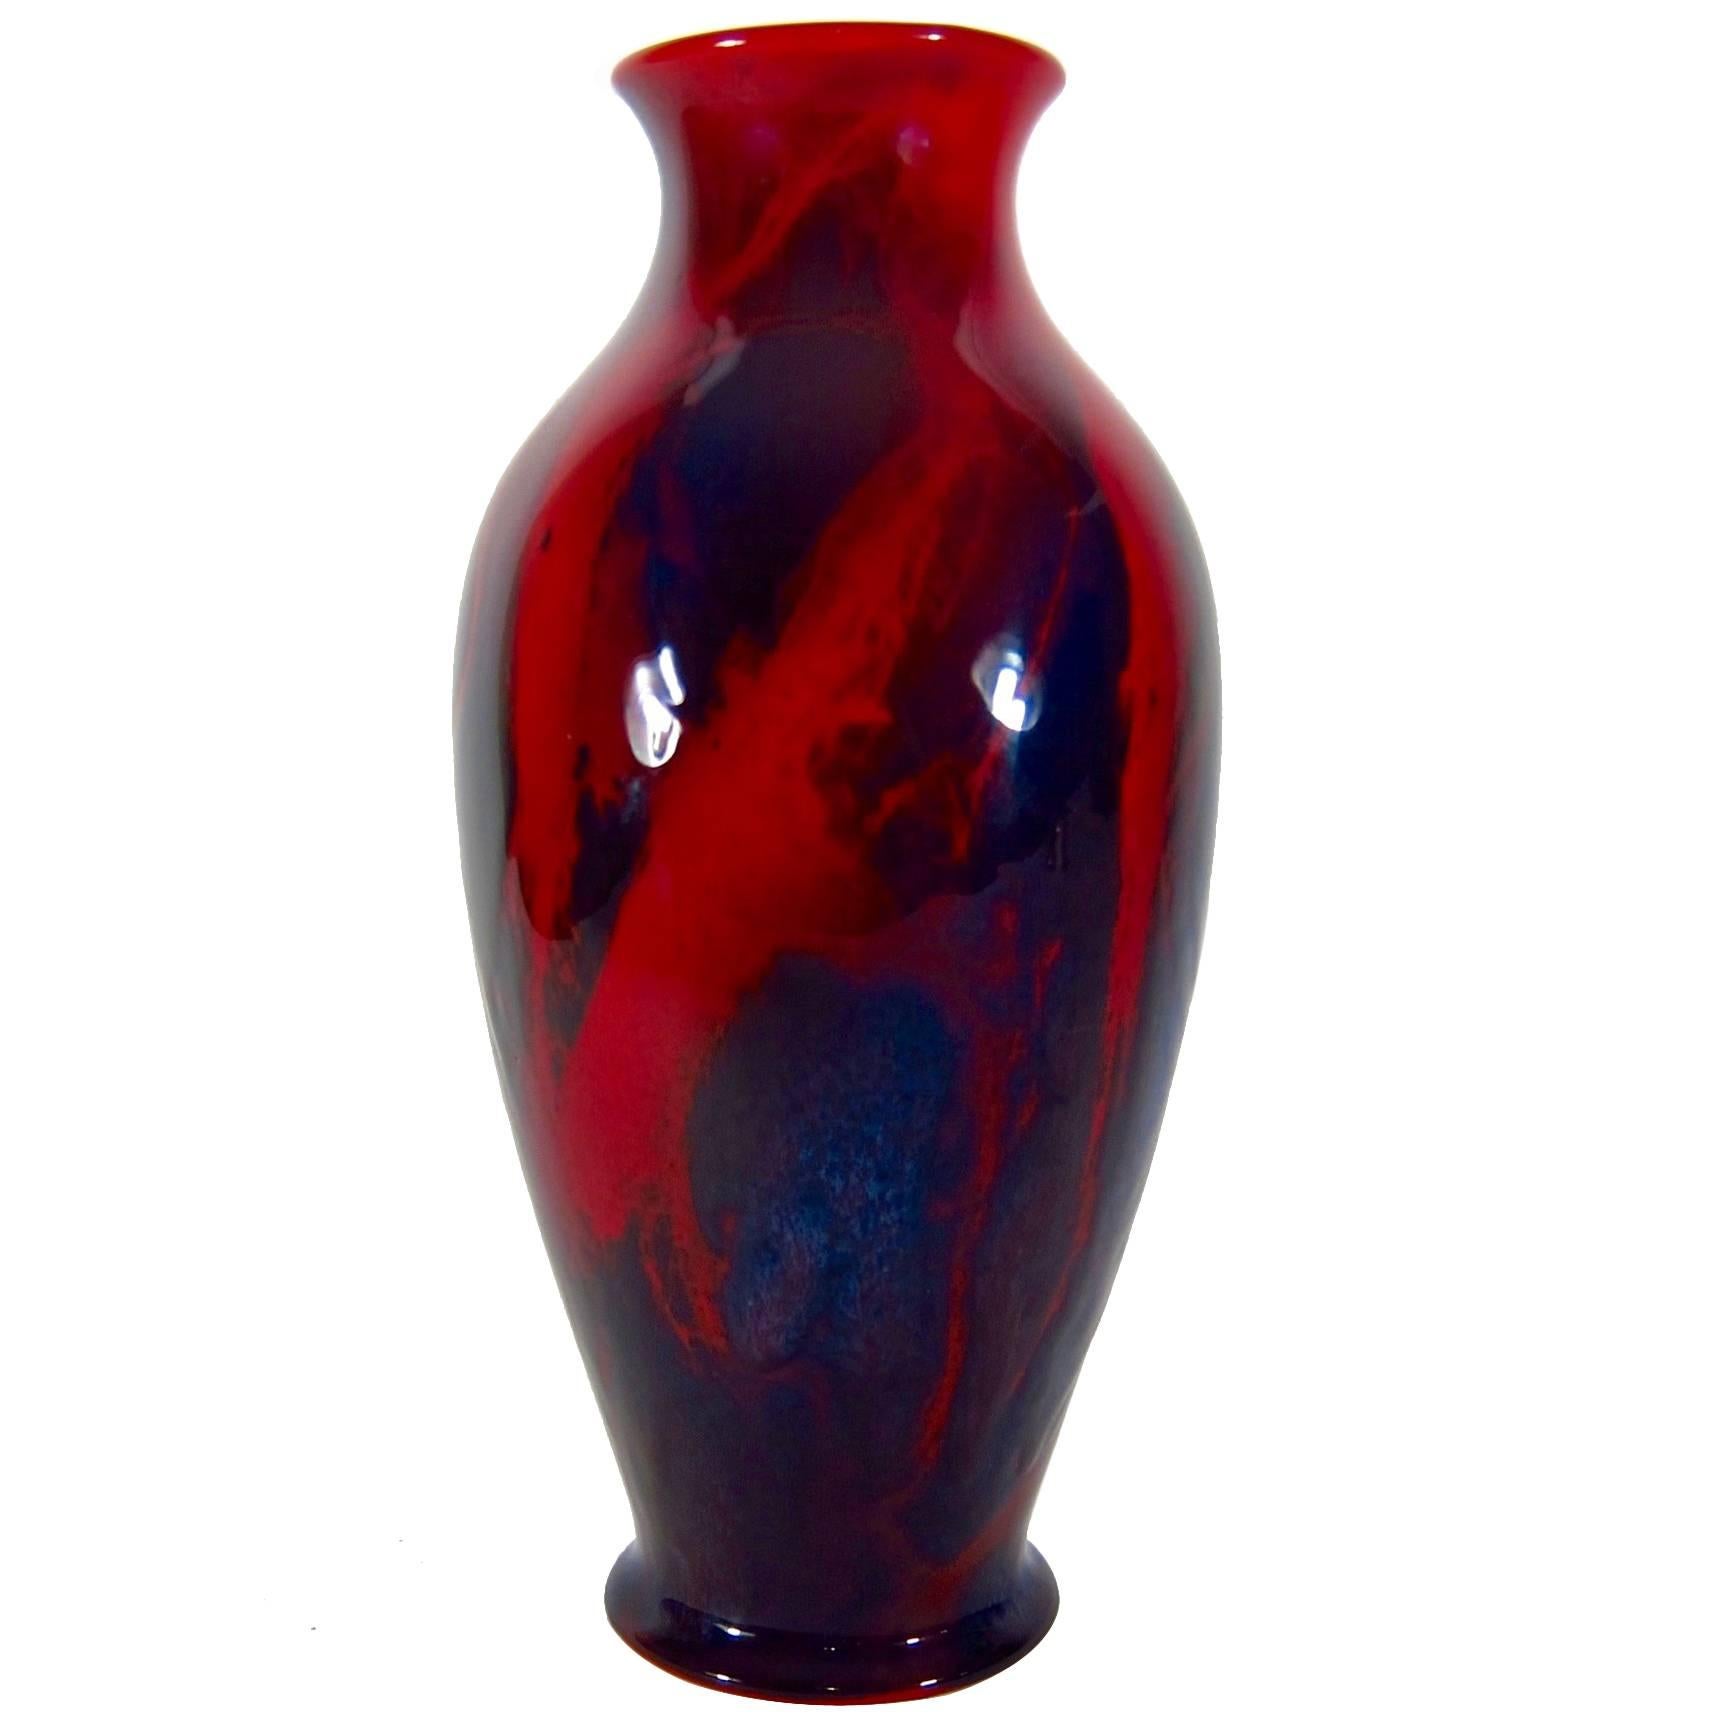 Large Doulton Sung Ware Red Flambé Art Deco Vase by Charles Noke & Fred Moore